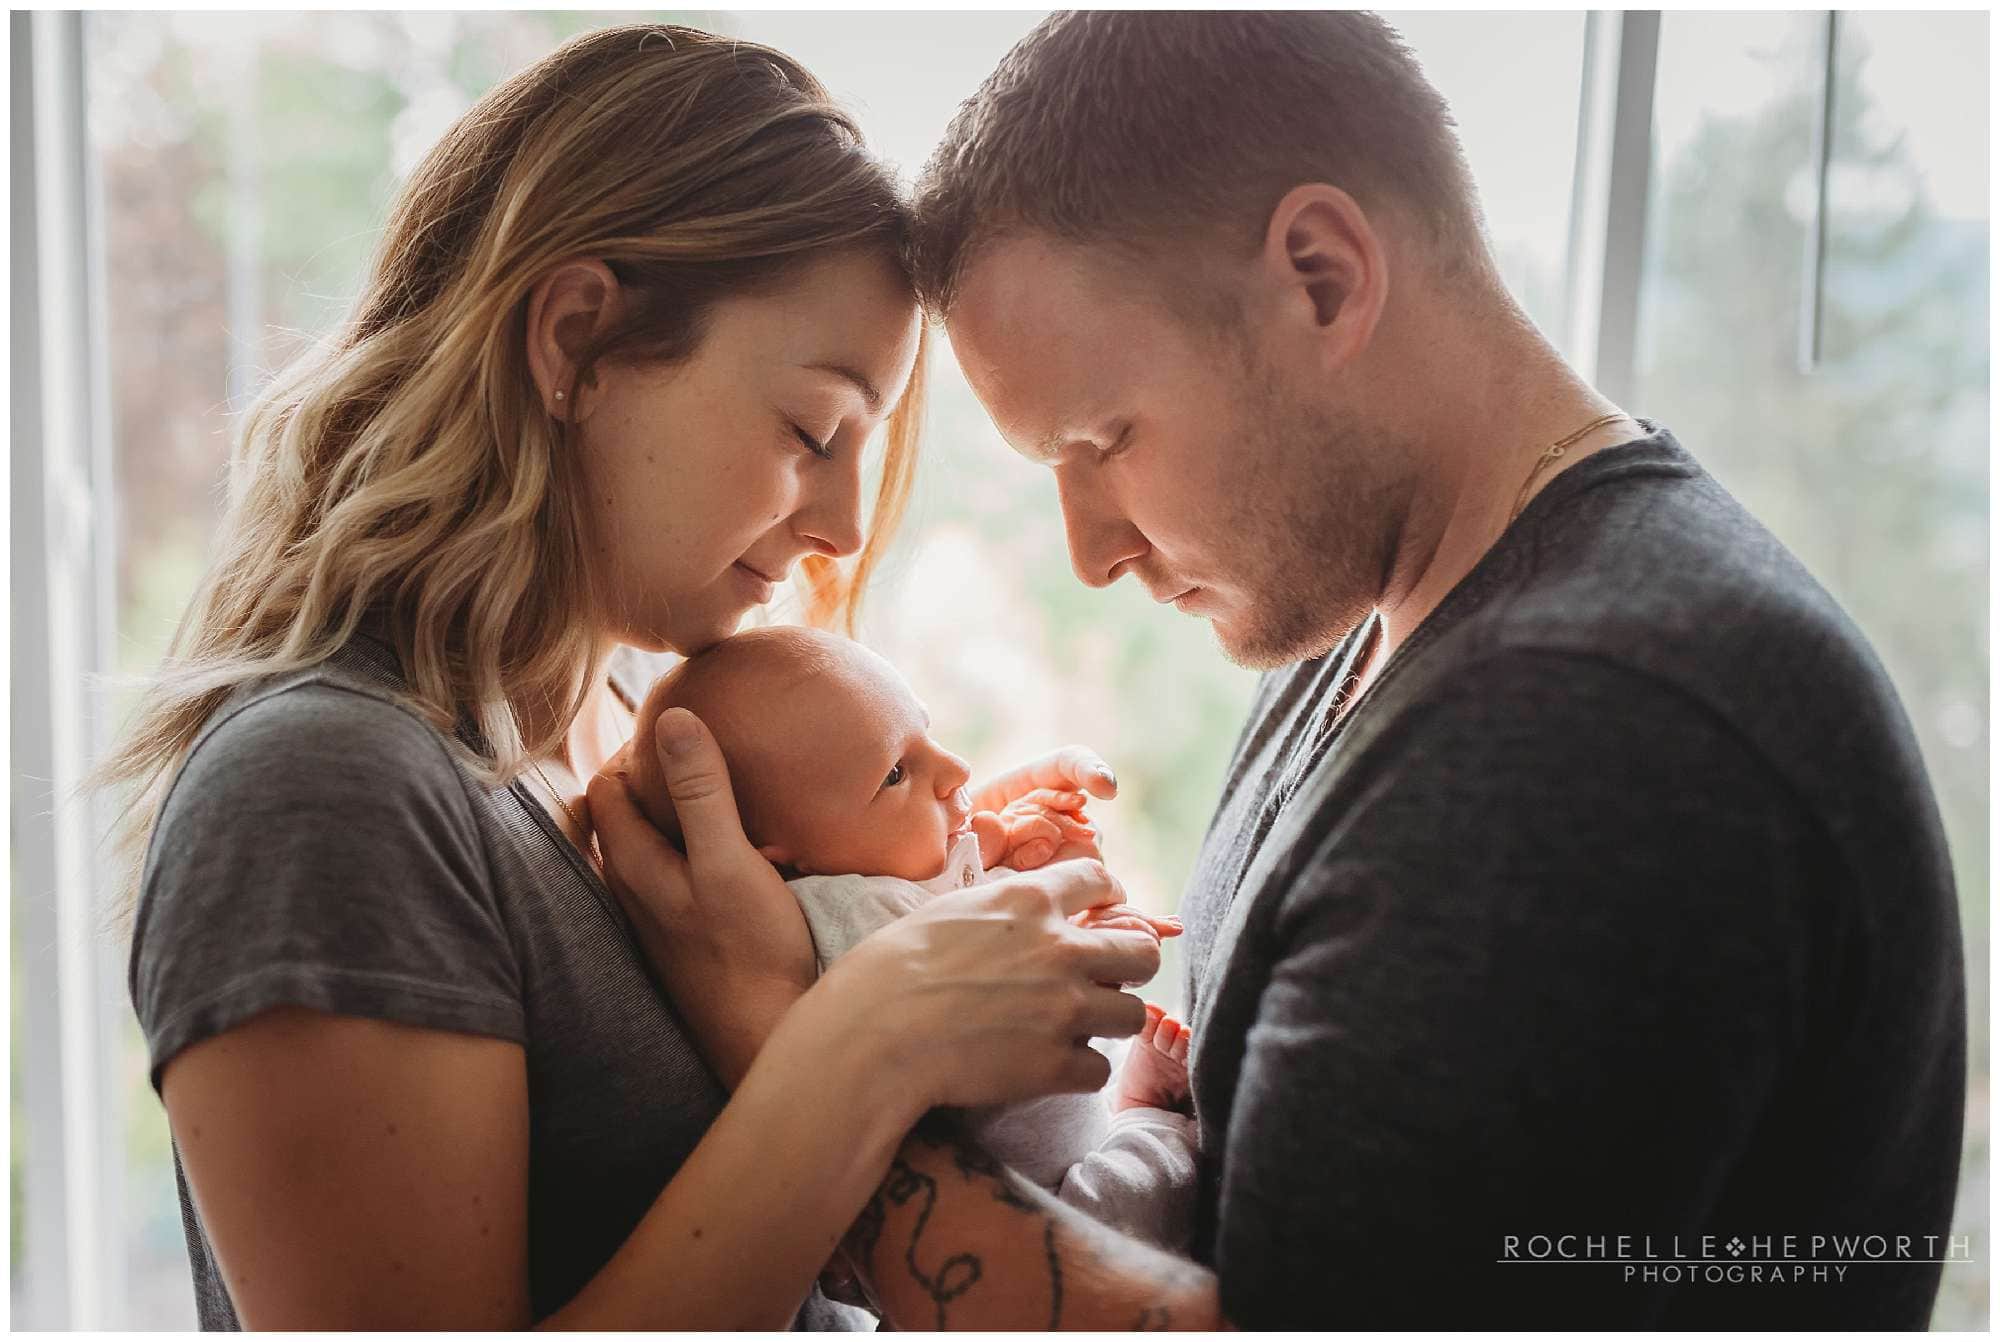 couple standing in front of window with newborn baby between them